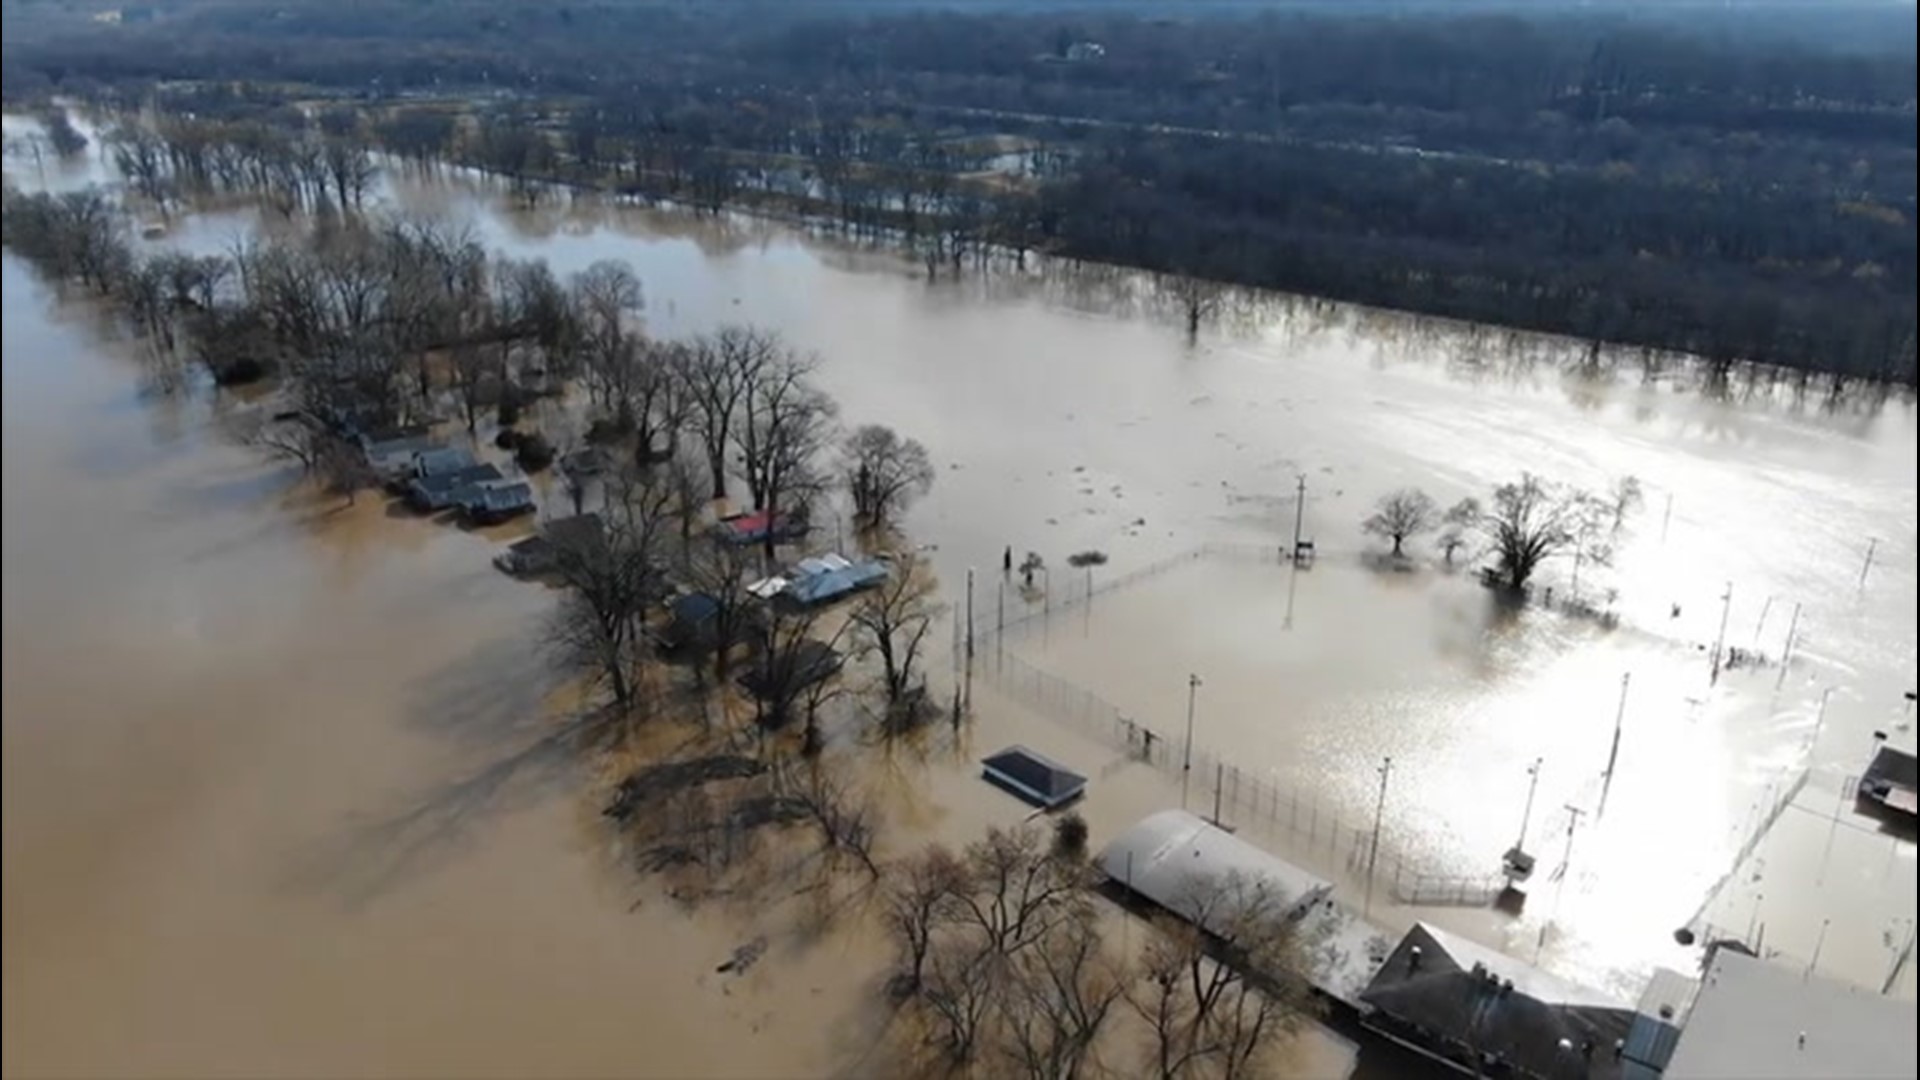 Drone footage, from March 5, shows a better view of the terrible  flooding which impacted Louisville, Kentucky.